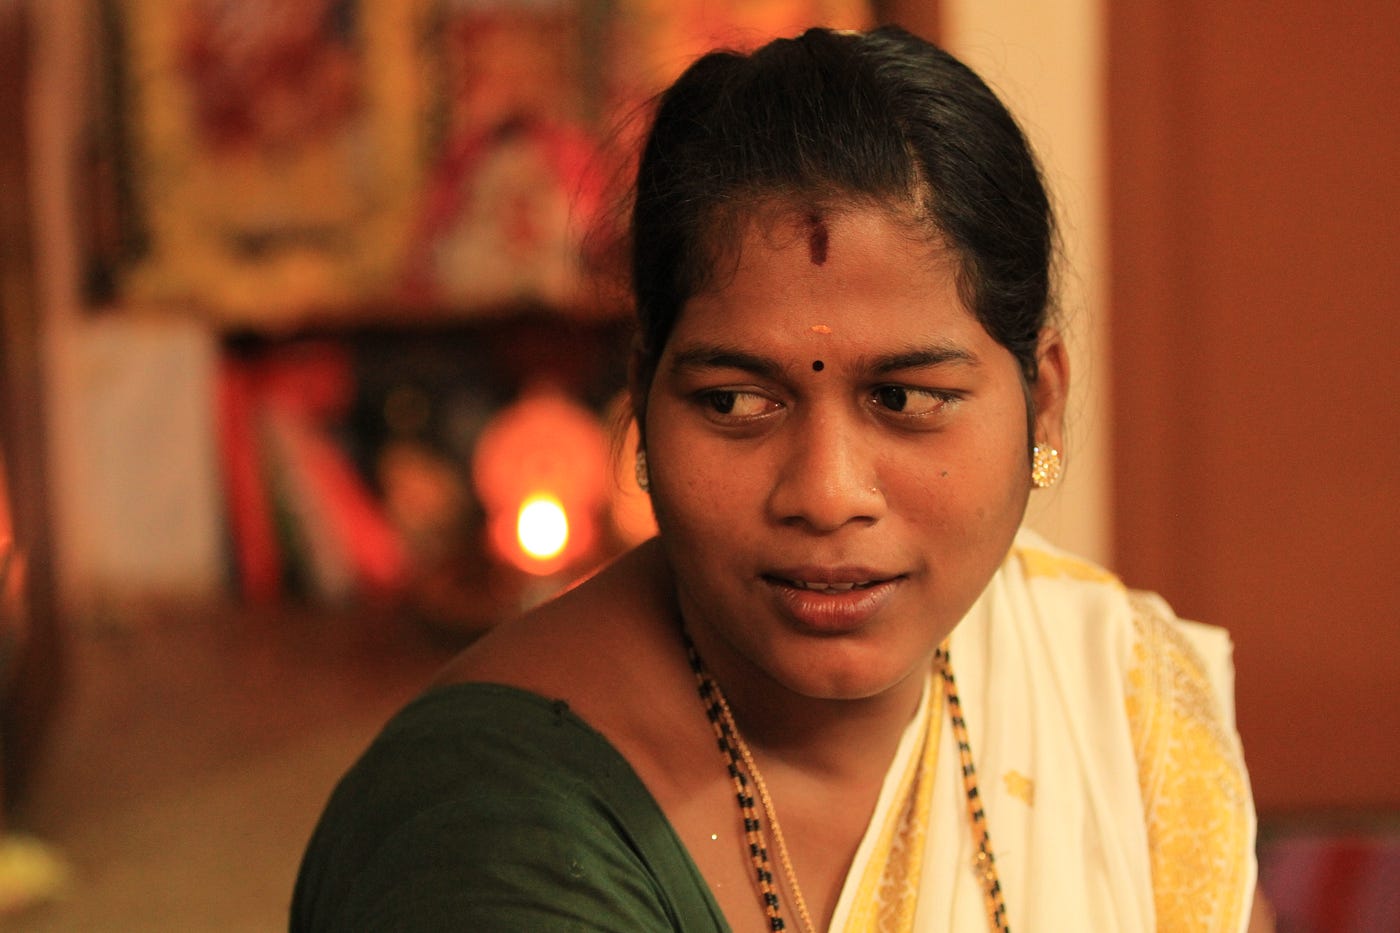 Tales from a hamam — The life of transgenders in India by Makepeace Sitlhou Medium pic